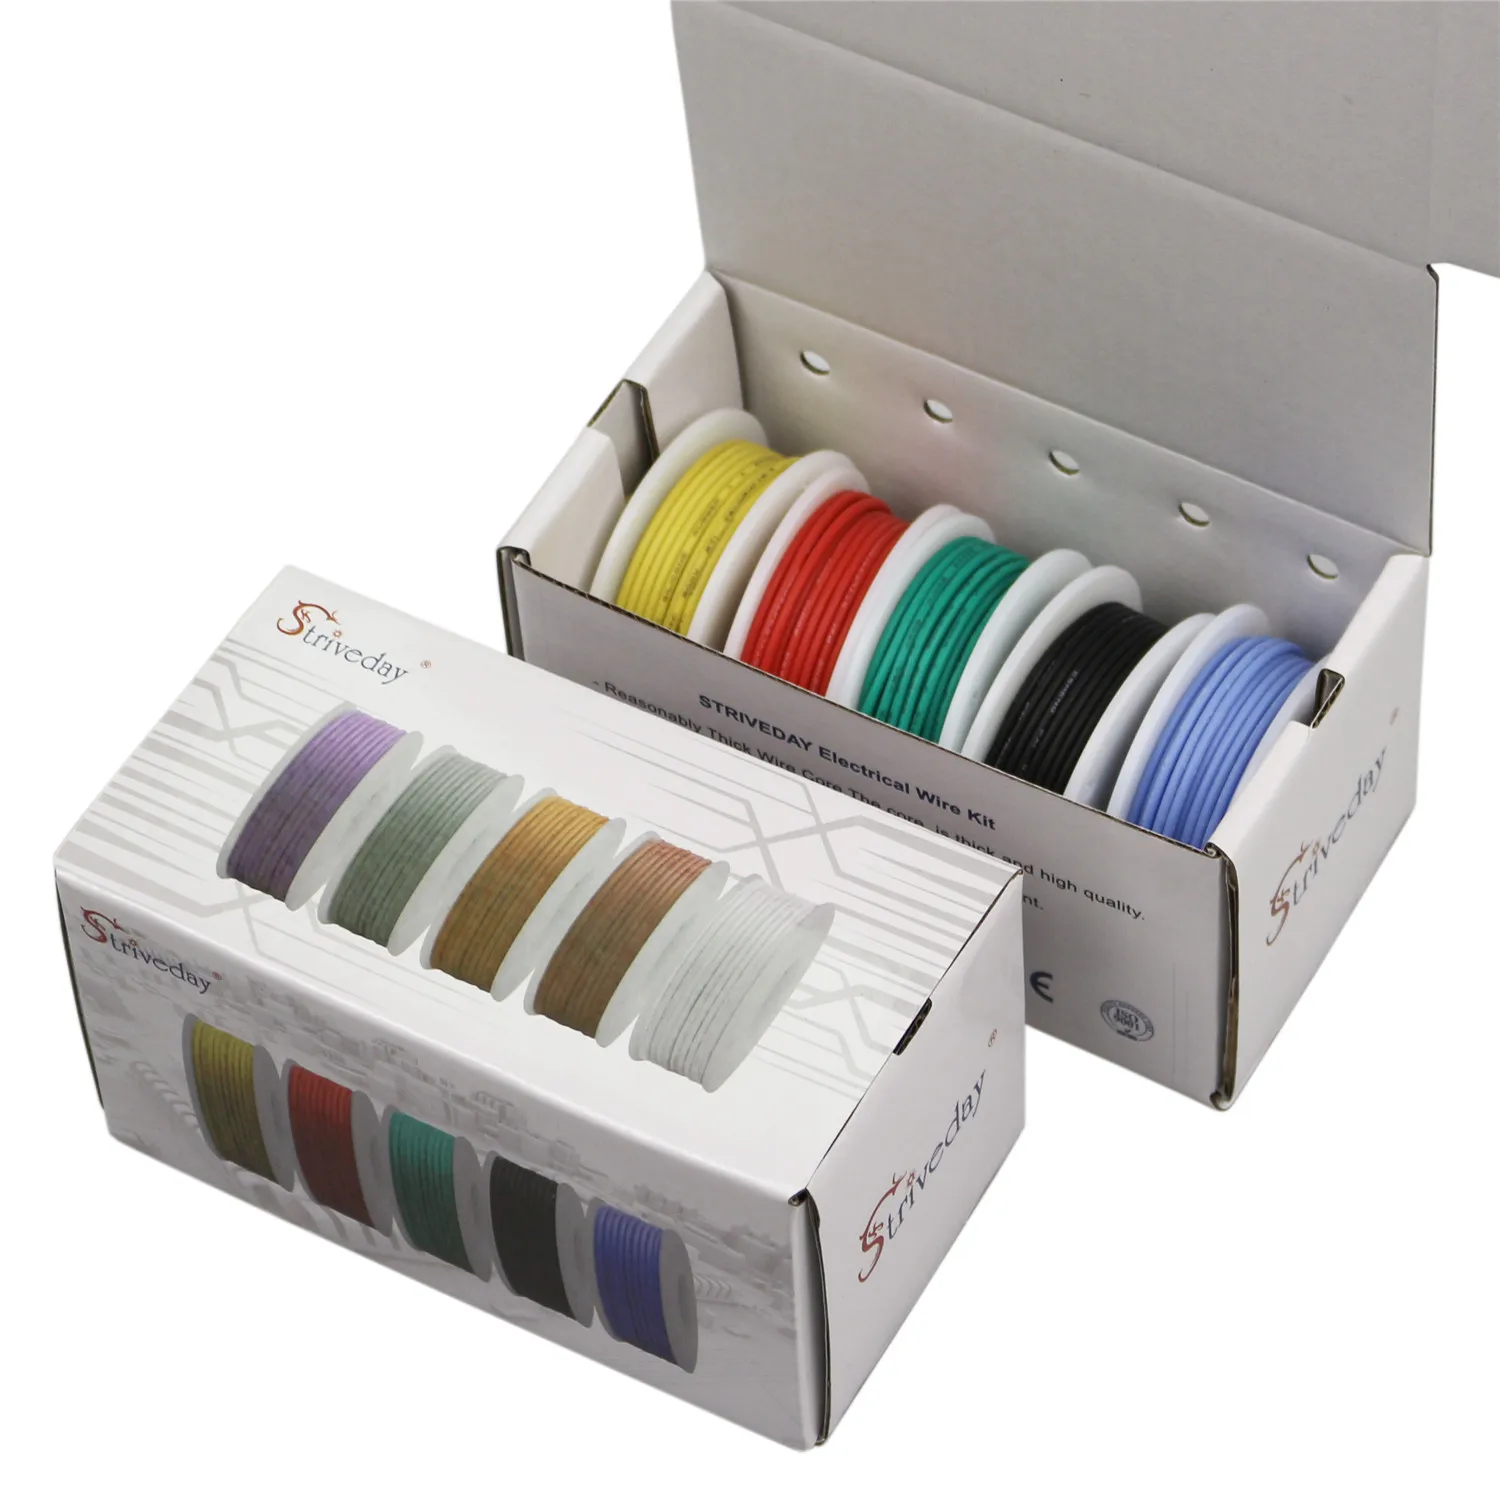 

22AWG 30m flexible silicone wire 5 color mixing box 1 package wire and cable tinned copper wire stranding wire DIY